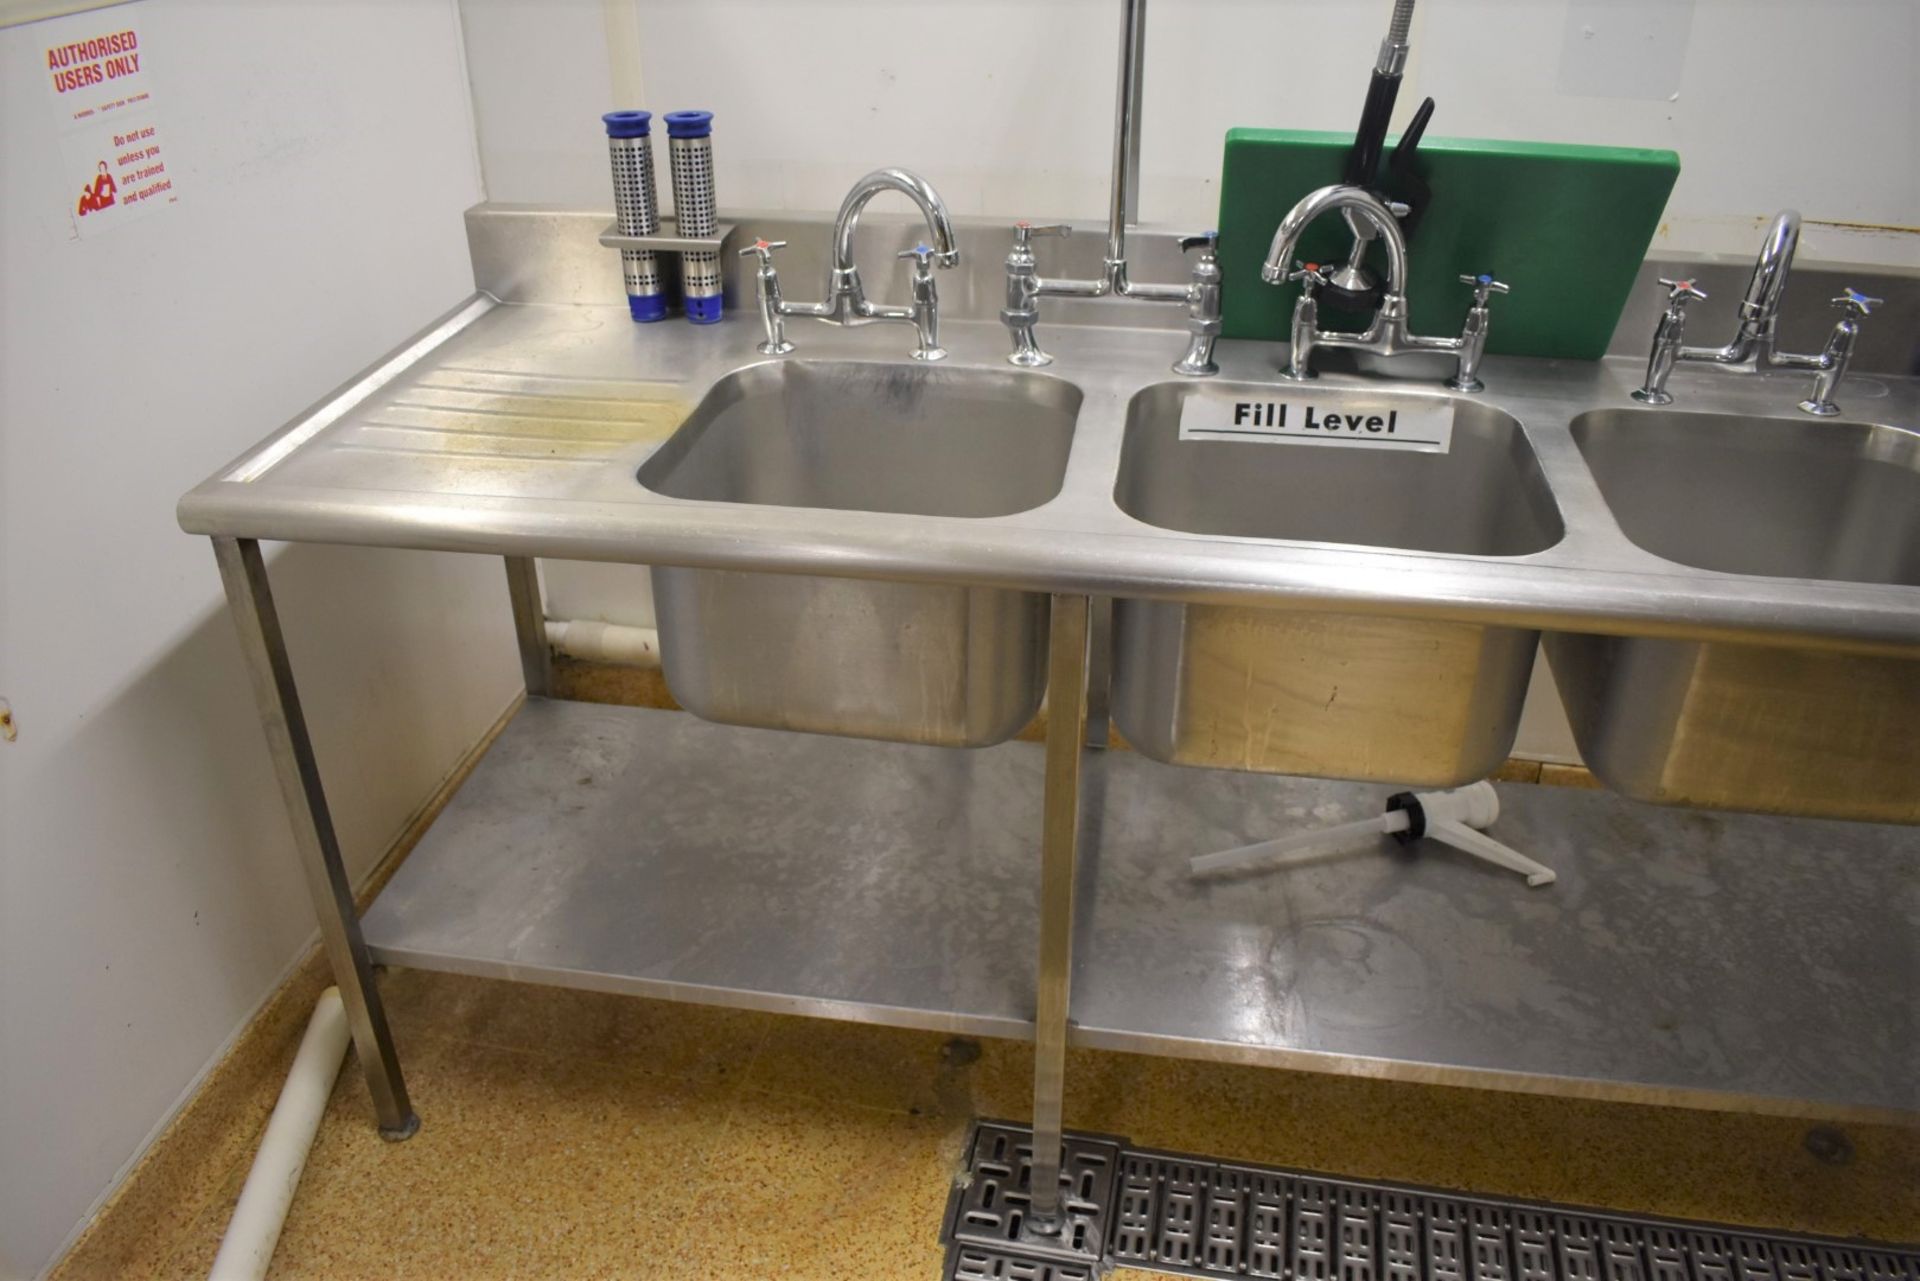 1 x Large Stainless Steel Wash Unit With Triple Sink Basins, Hose Rinser Tap, Mixer Taps, Drainer, - Image 4 of 6